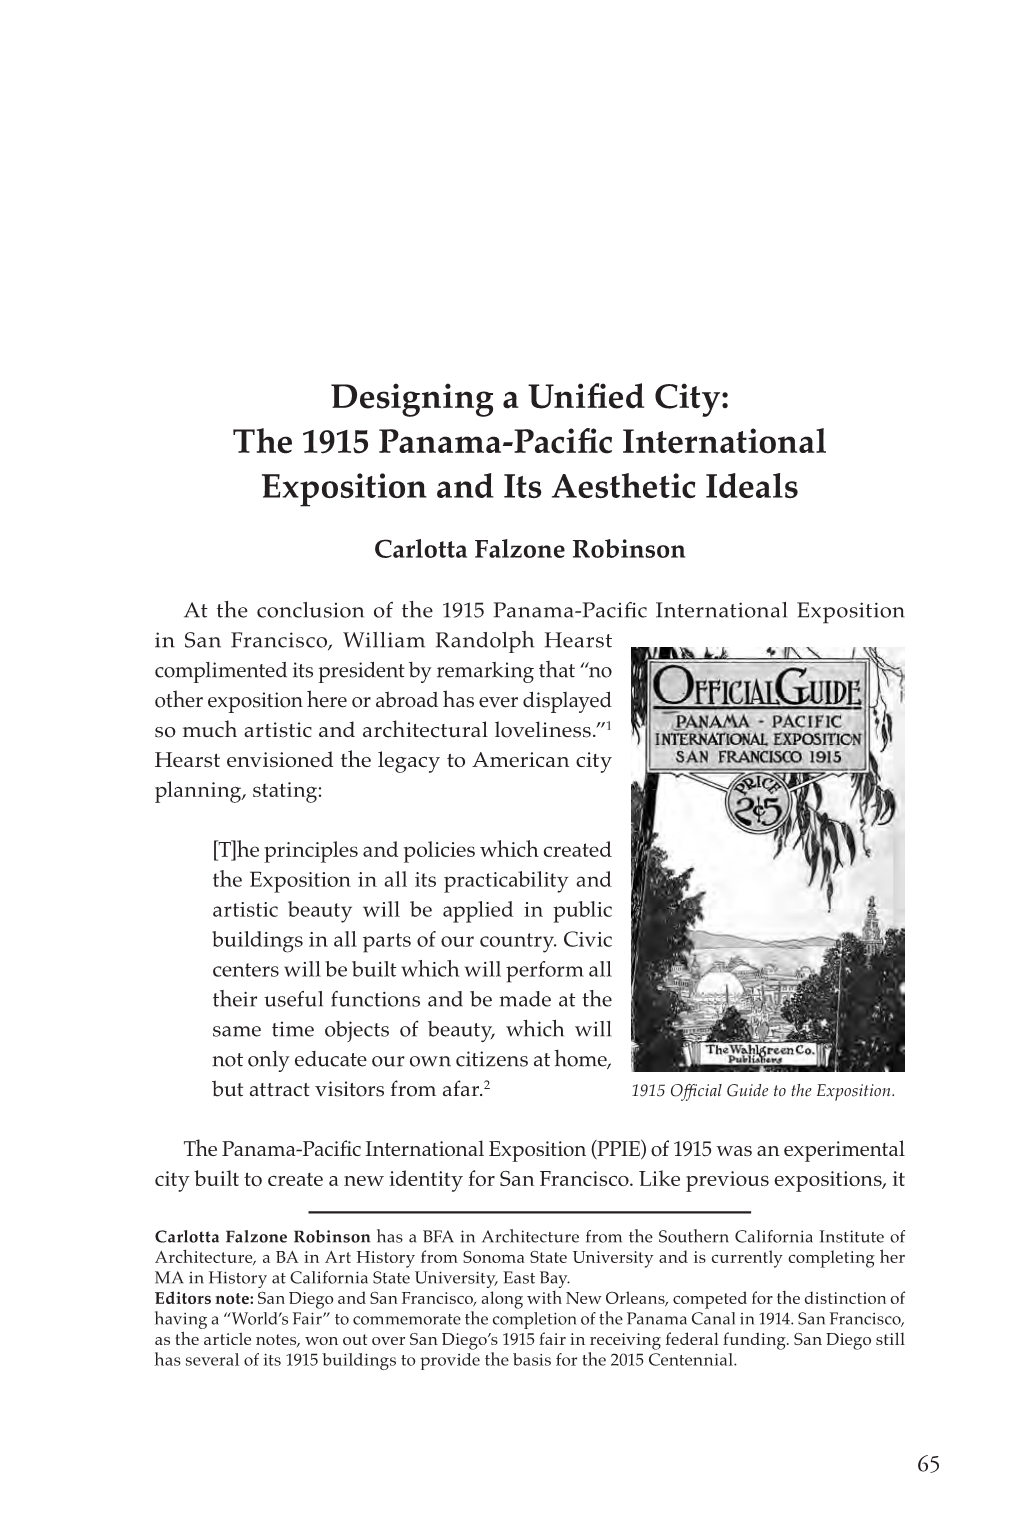 The 1915 Panama-Pacific International Exposition and Its Aesthetic Ideals